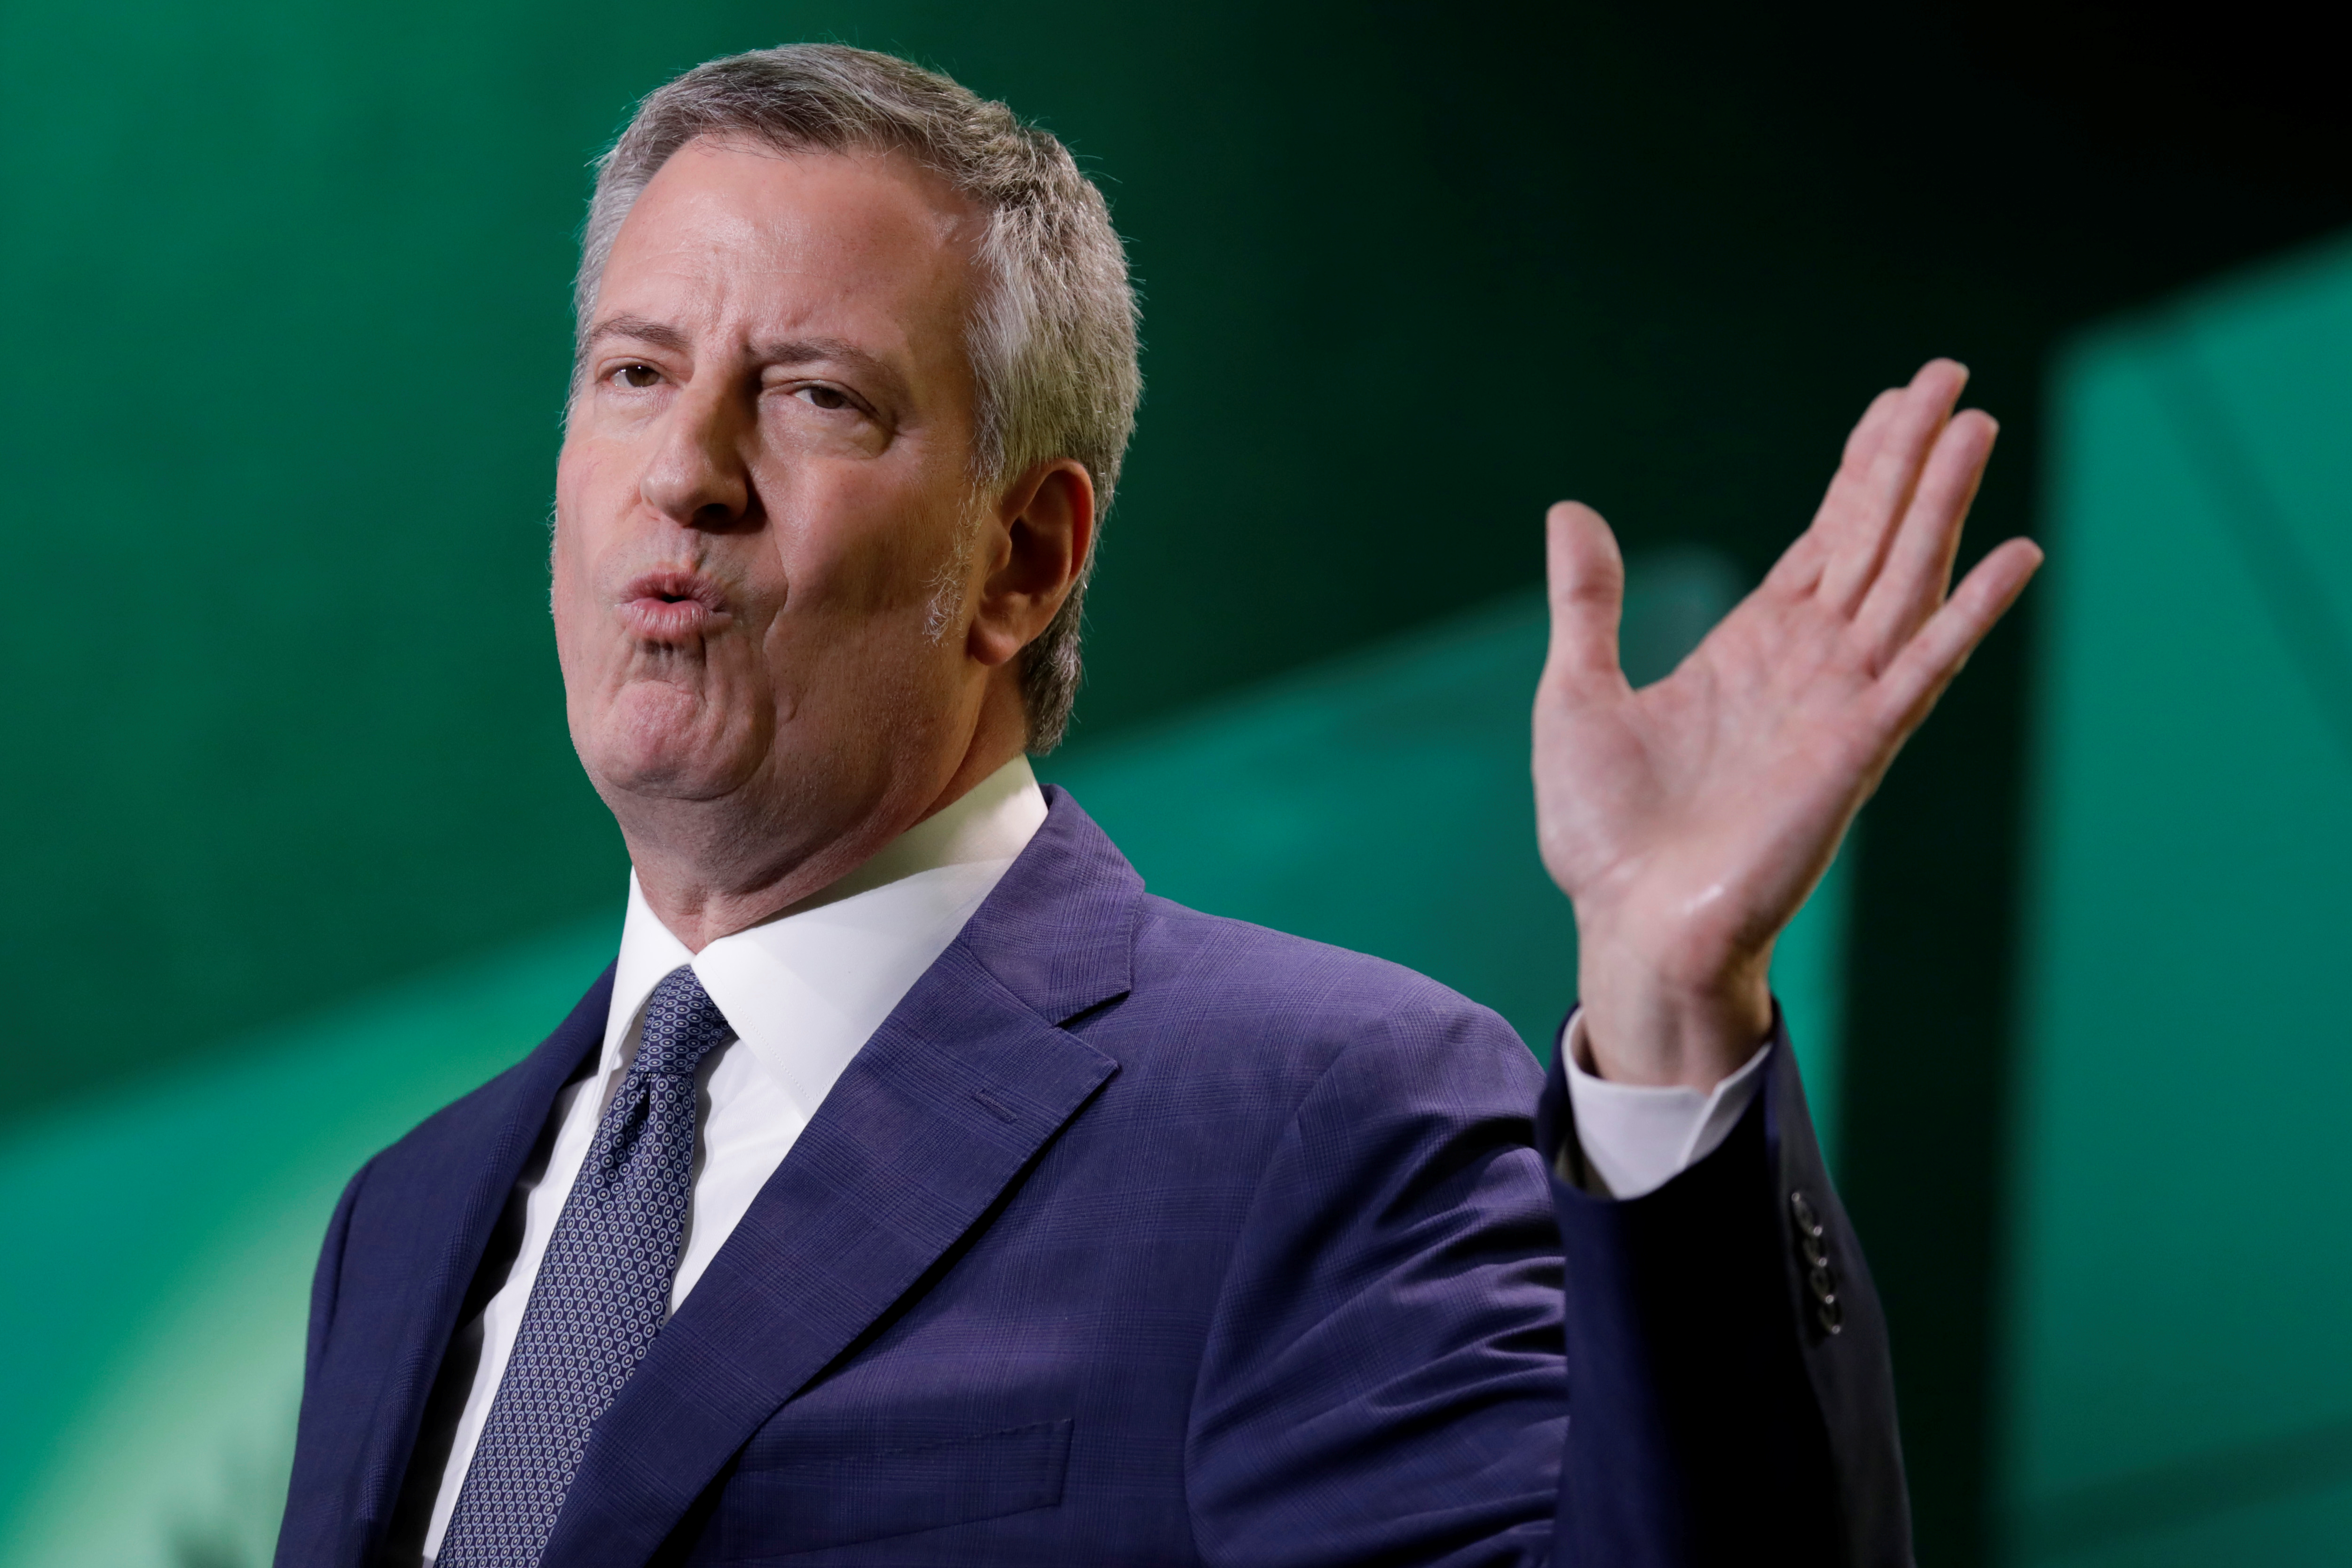 New York City Mayor Bill de Blasio delivers remarks at the United States Conference of Mayors winter meeting in Washington, U.S. January 24, 2019. REUTERS/Yuri Gripas